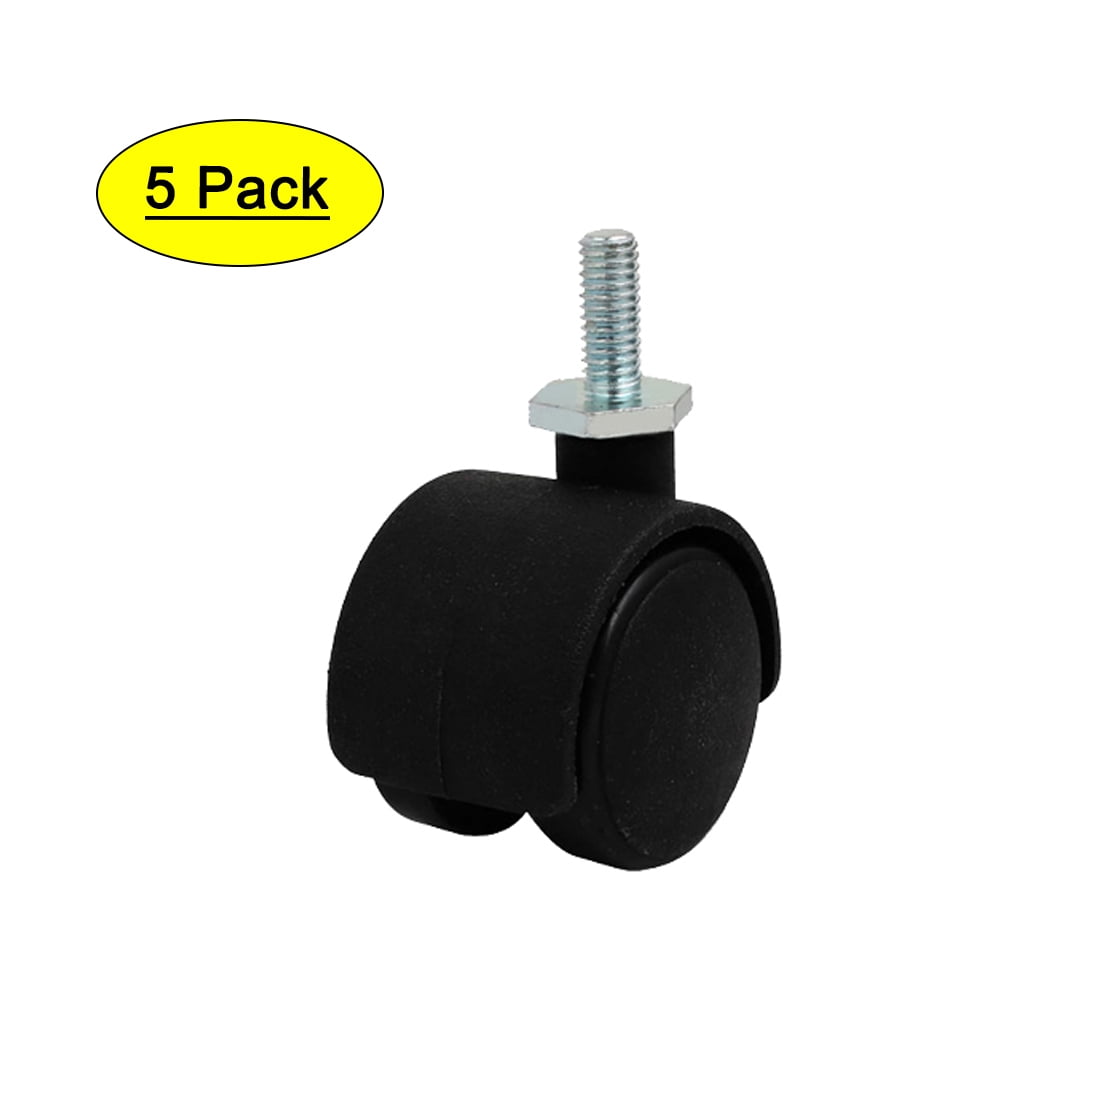 Color : Threaded Office Chair Castor Wheels 50mm Swivel Casters Wheels M10 Threaded Trolley Furniture Caster Plastic Caster No Noise 5pcs 